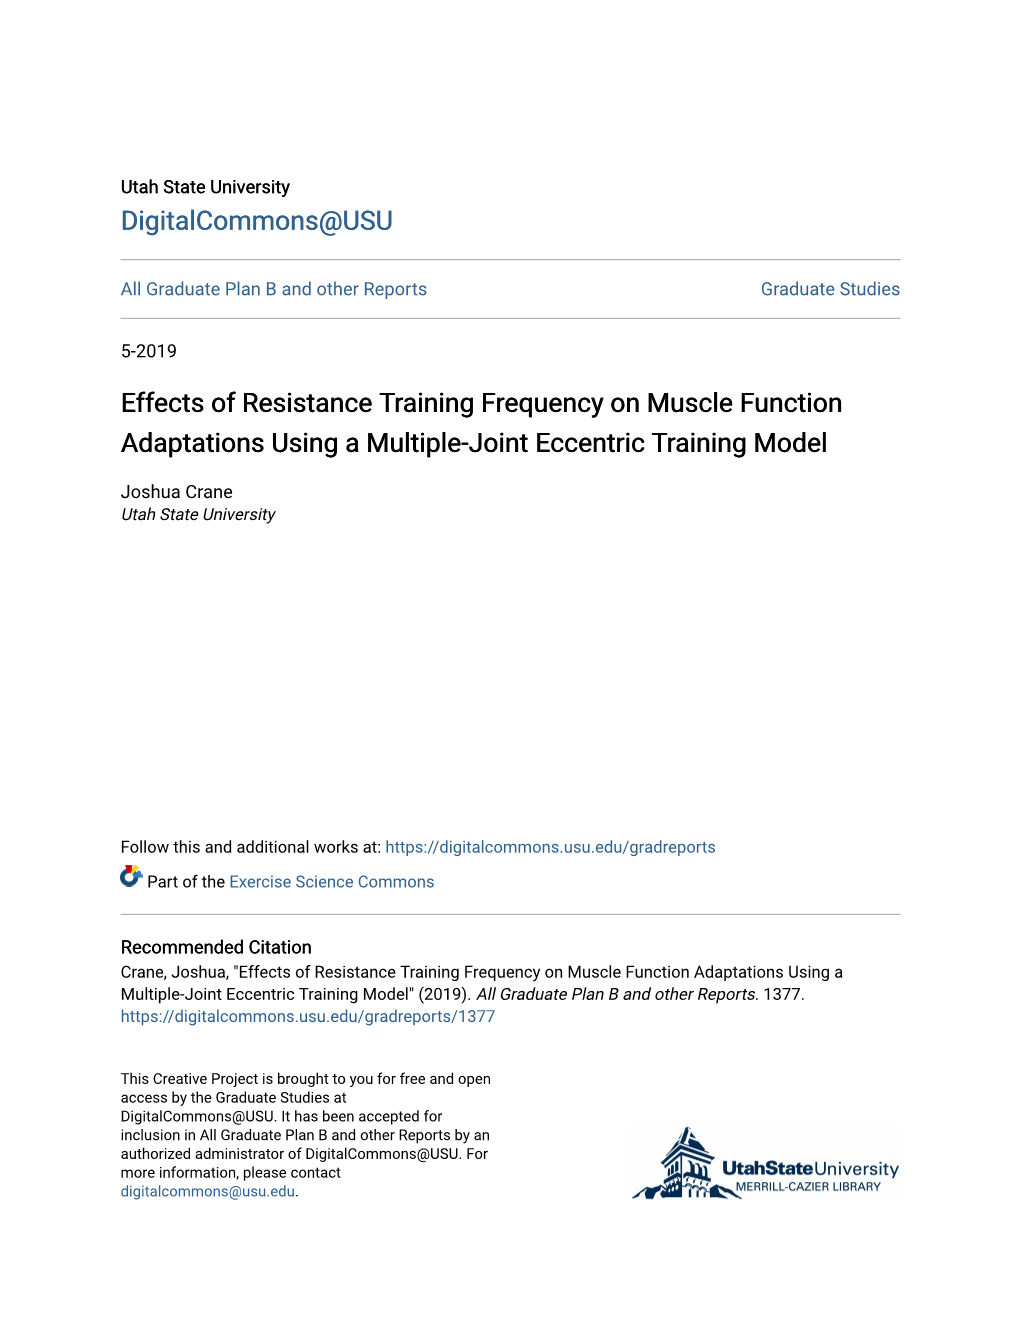 Effects of Resistance Training Frequency on Muscle Function Adaptations Using a Multiple-Joint Eccentric Training Model